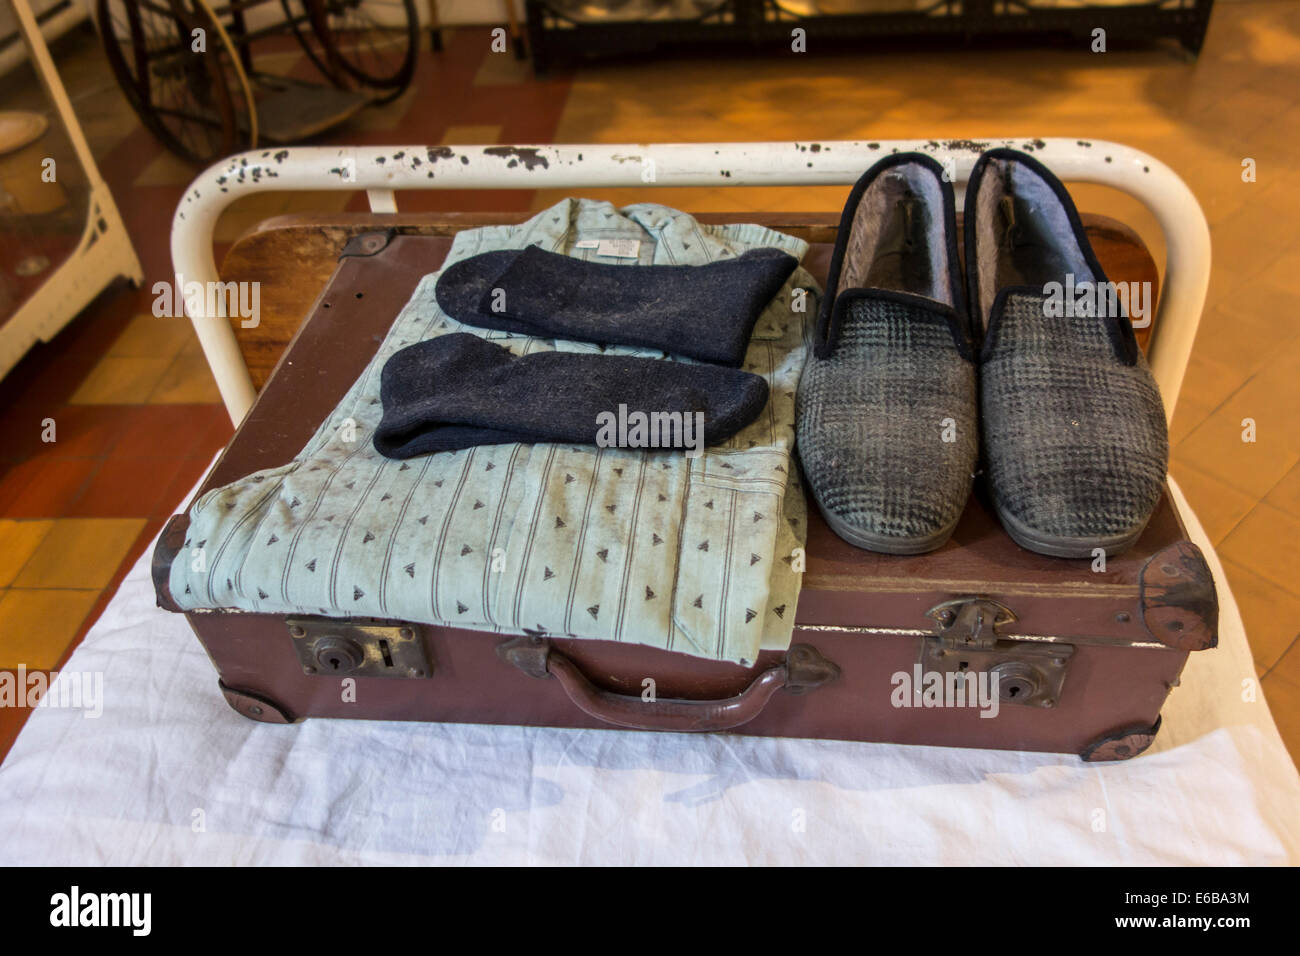 Suitcase with pyjamas and slippers of psychiatric patient on hospital bed, Dr Guislain Museum about psychiatry in Ghent, Belgium Stock Photo